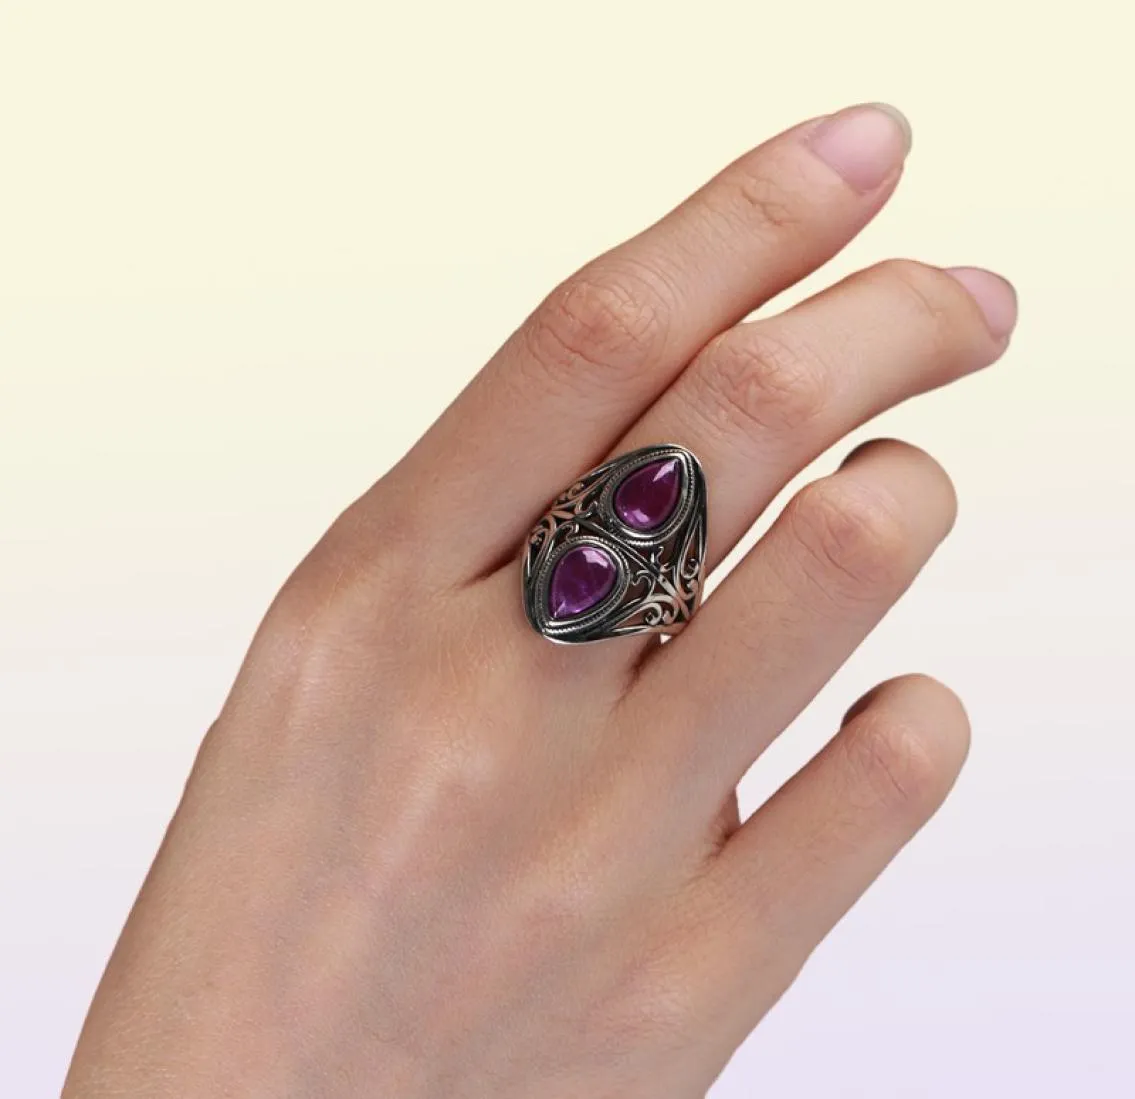 S Luxe Vintage Natural Amethyst 925 Sterling Silver Jewelry Wedding Anniversary Party Ring Gifts For Women83499861913512